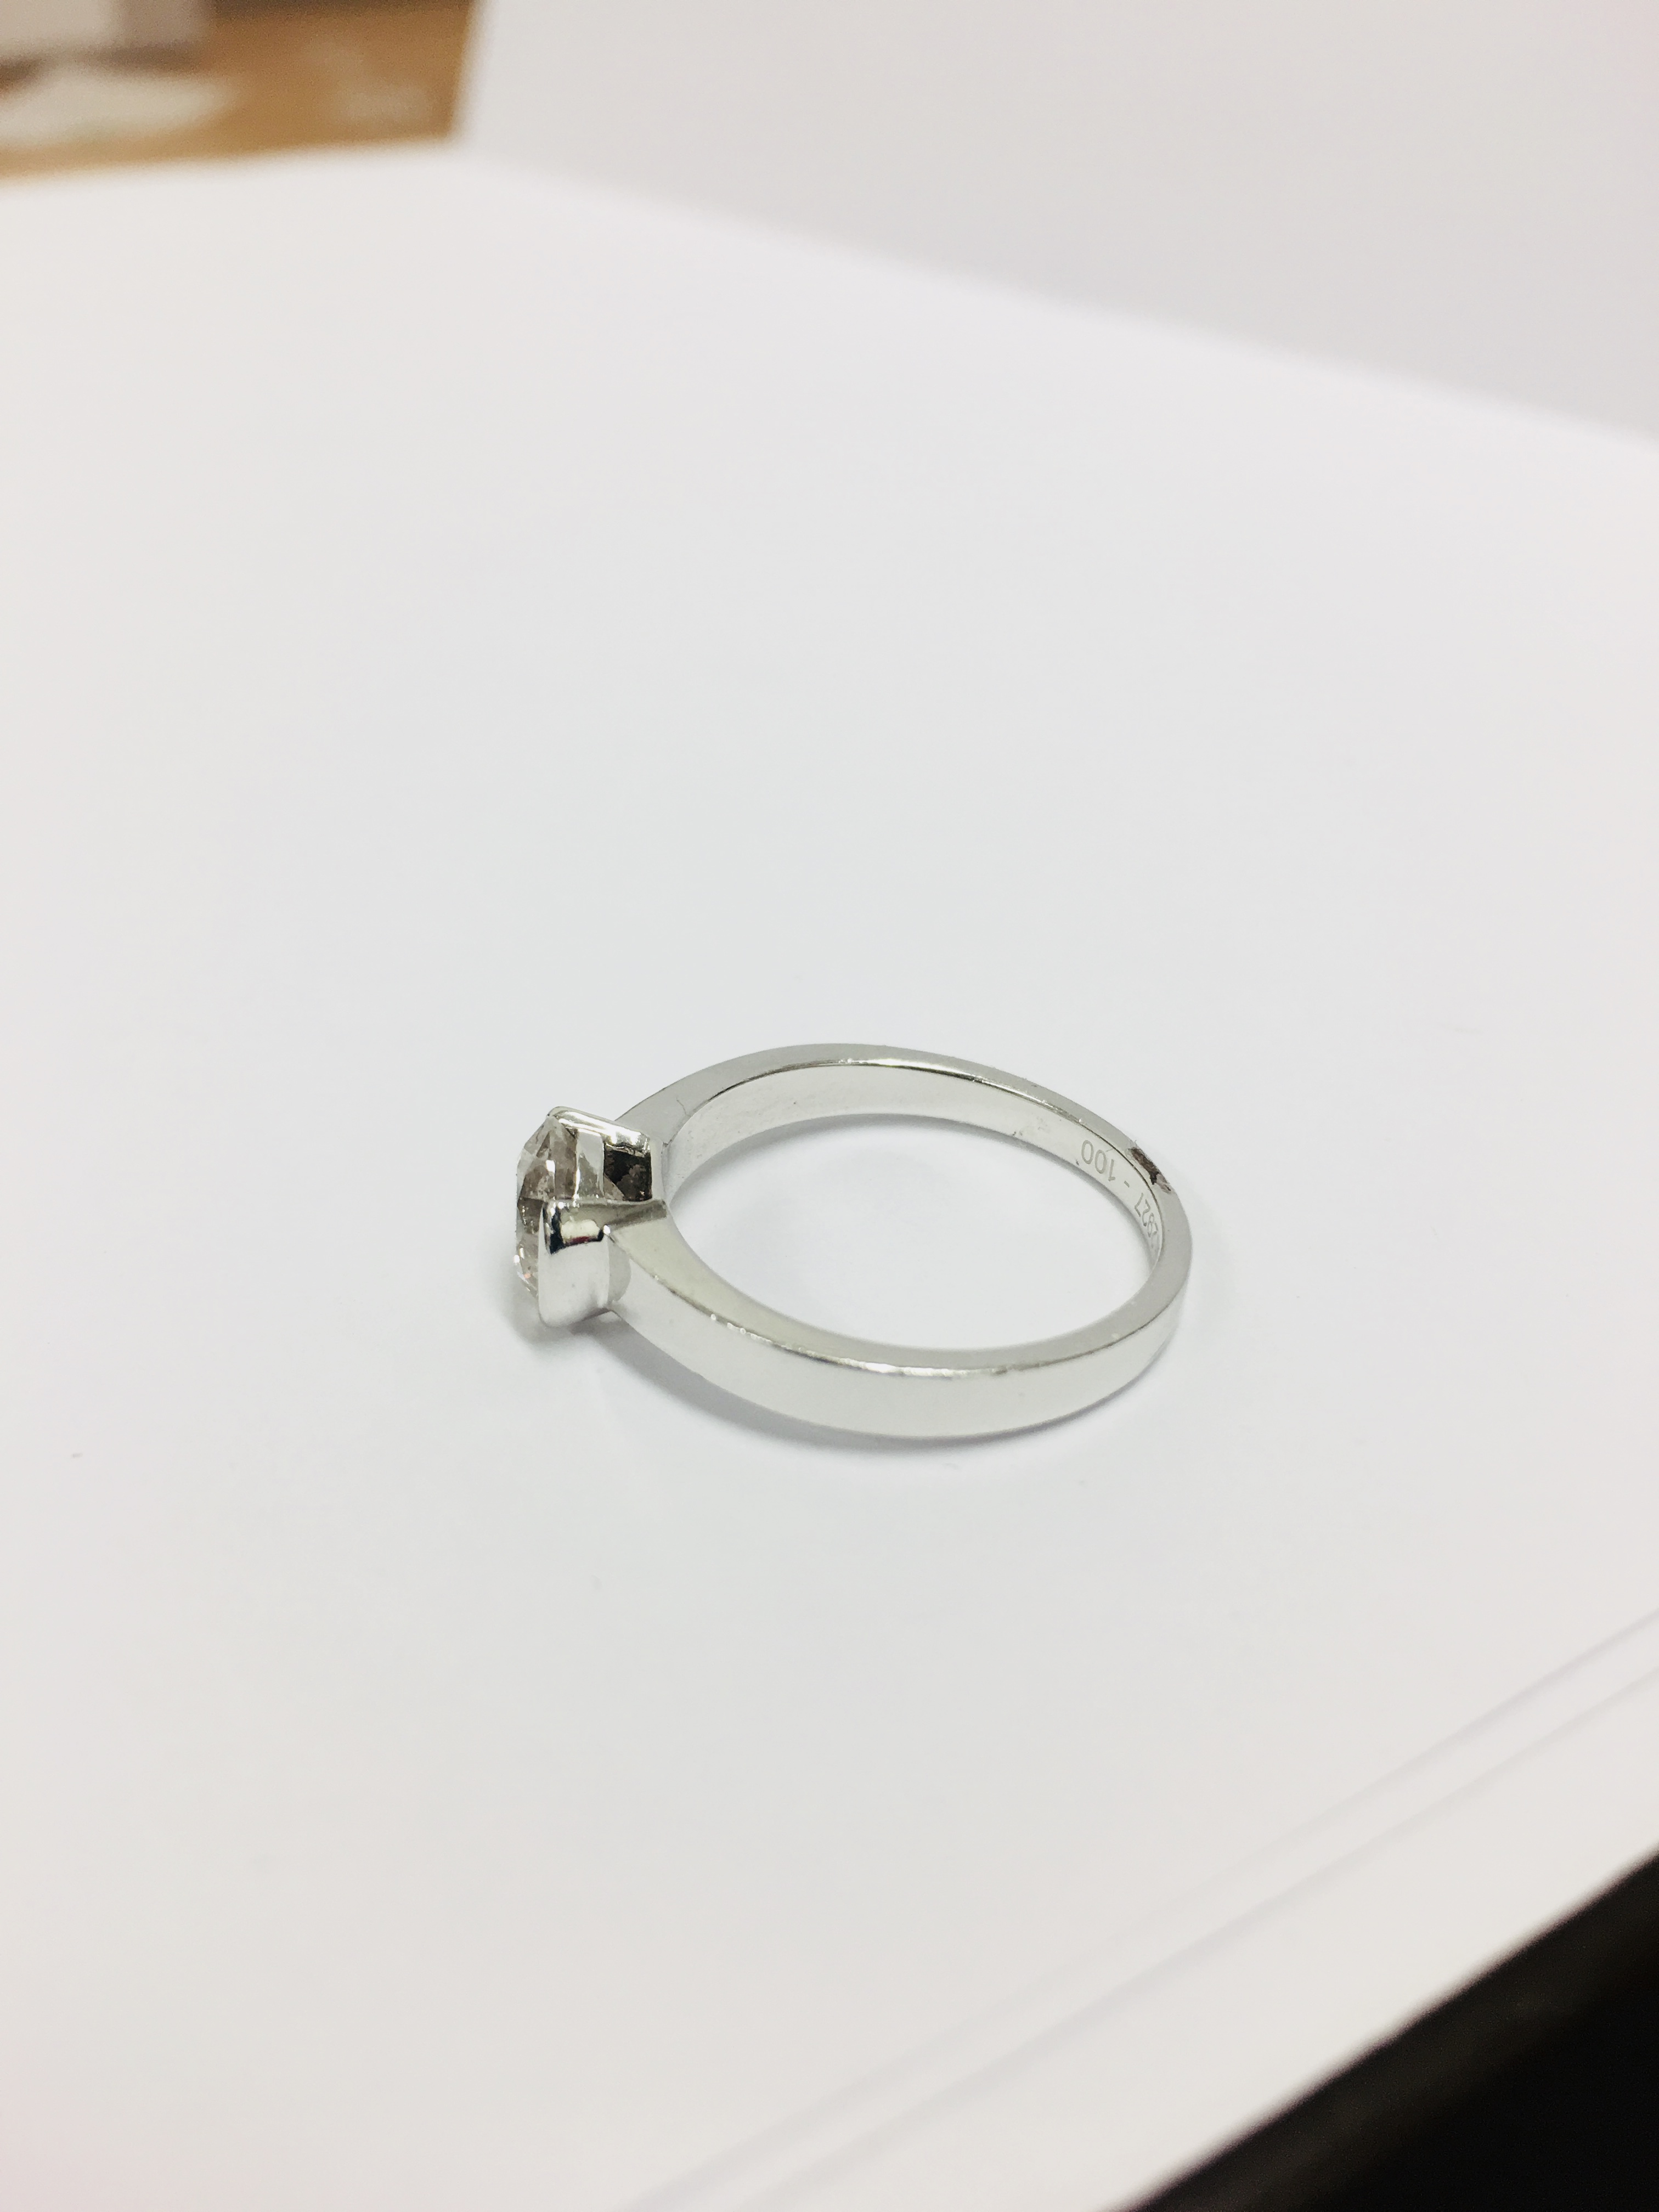 1.06ct diamond solitaire ring with a brilliant cut diamond. H colour and I1 clarity. Set in 18ct - Image 2 of 4